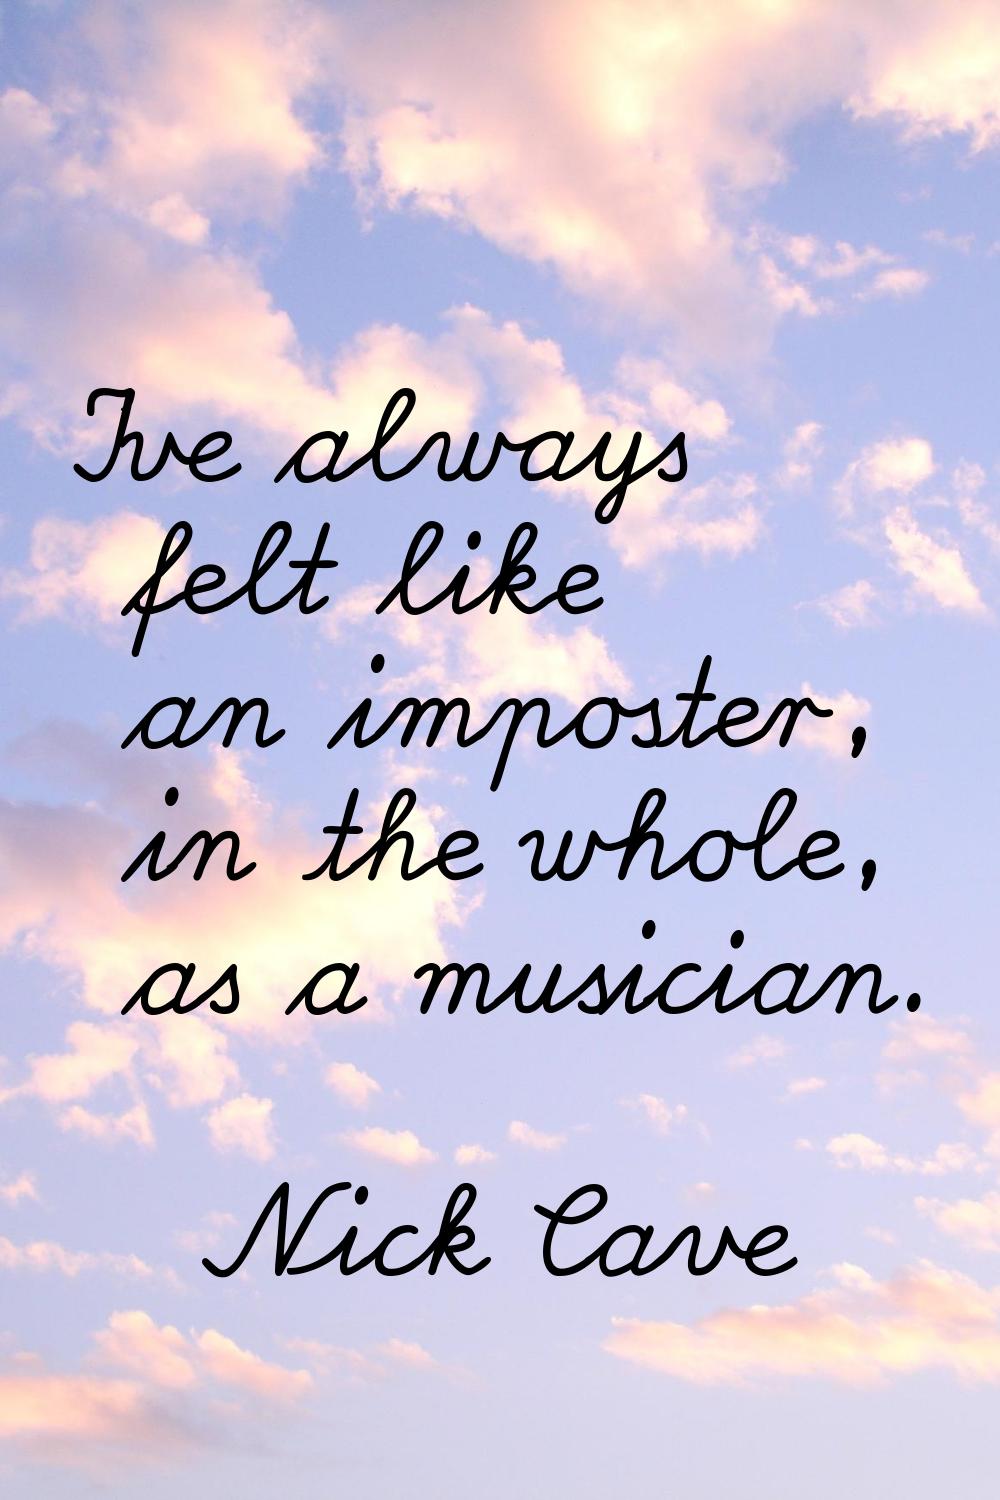 I've always felt like an imposter, in the whole, as a musician.